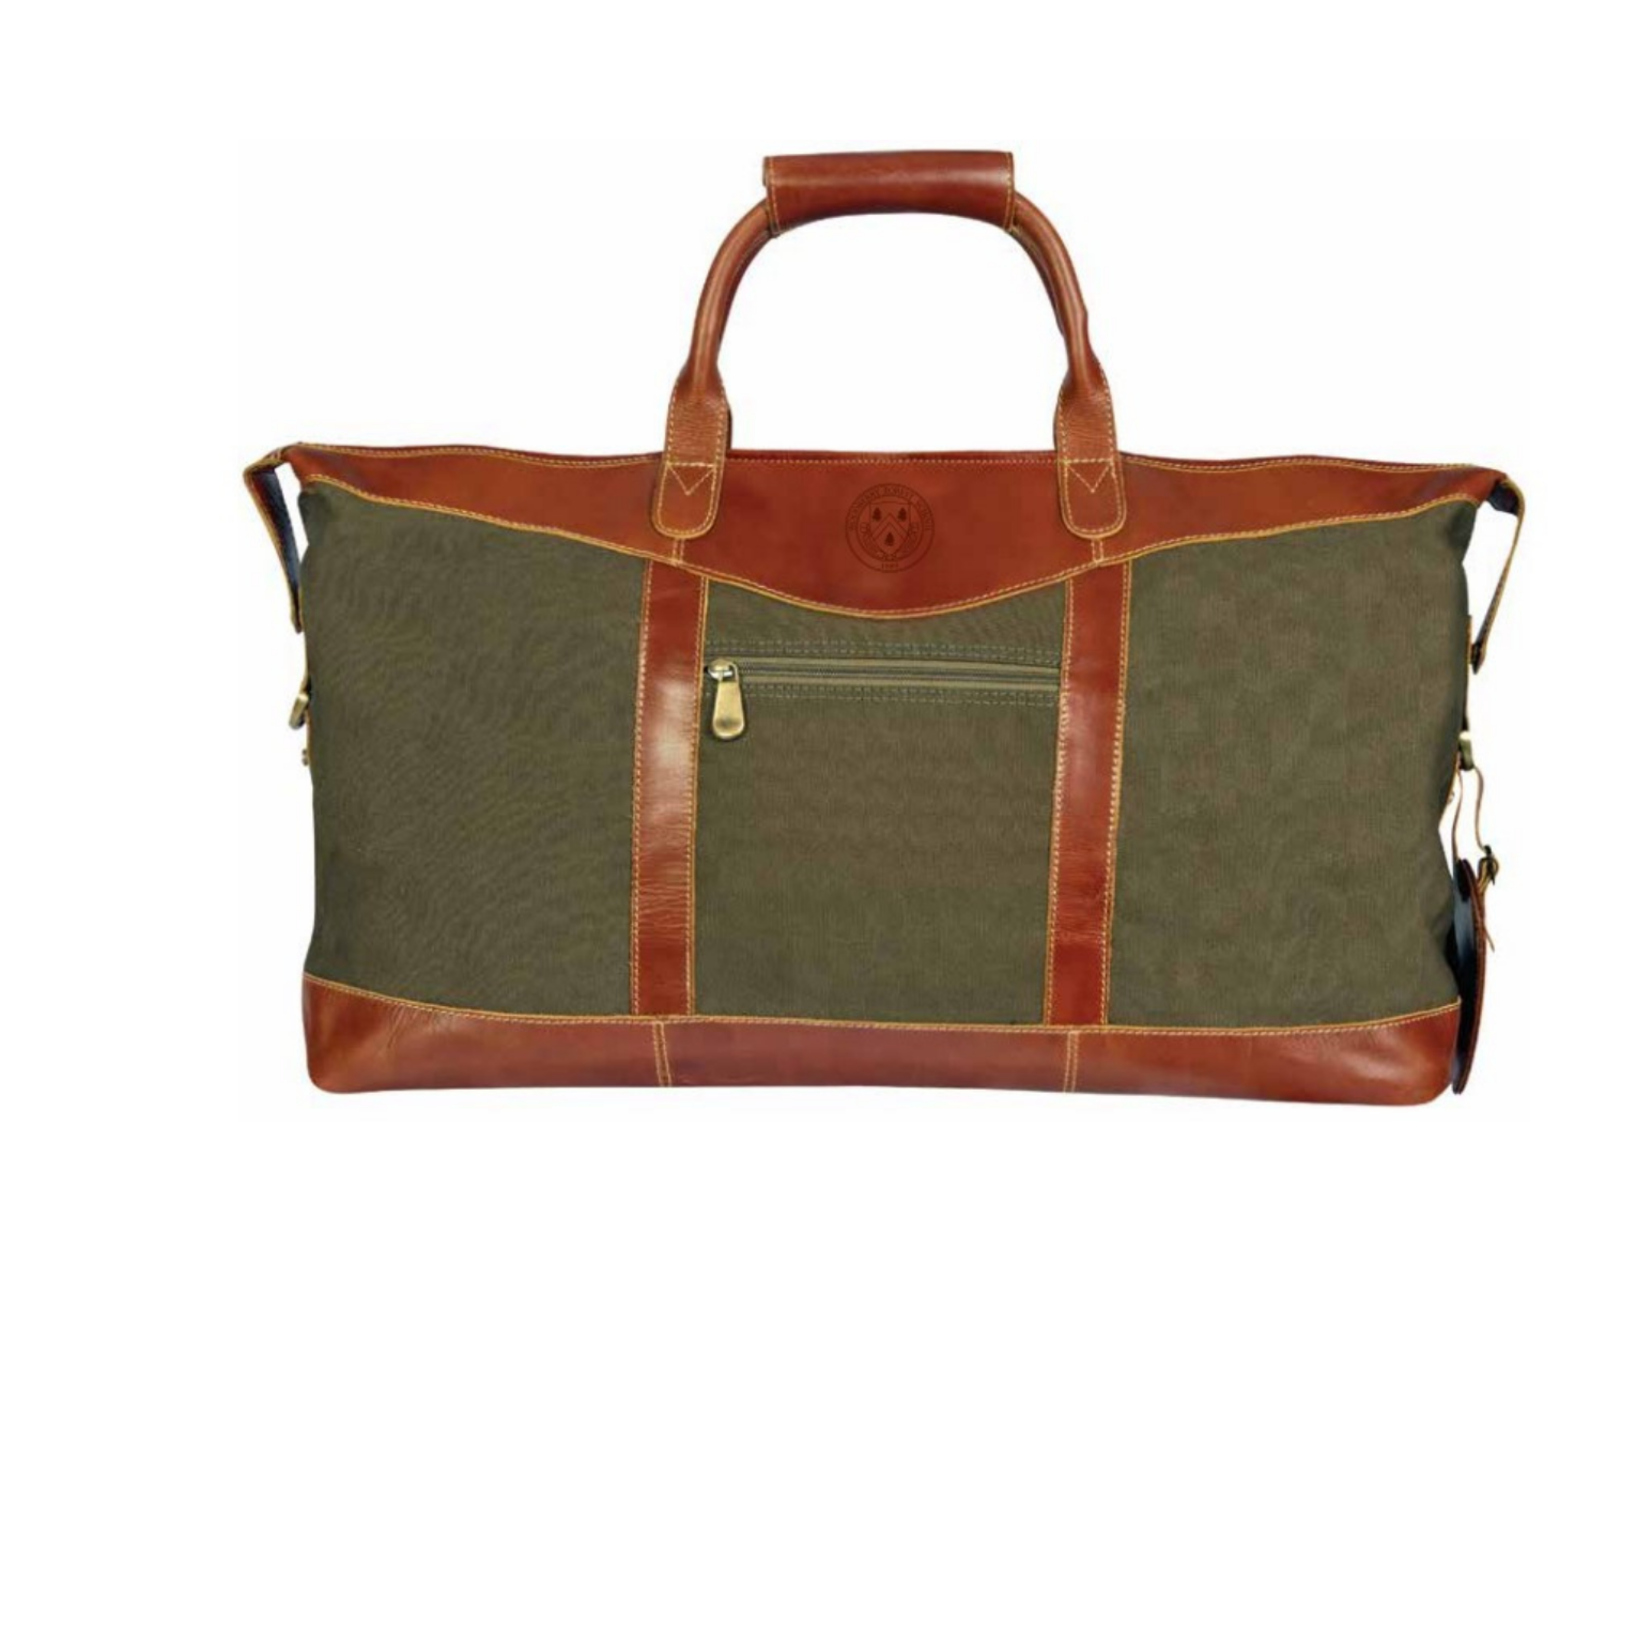 Canyon Outback Leather Pine Canyon Duffle